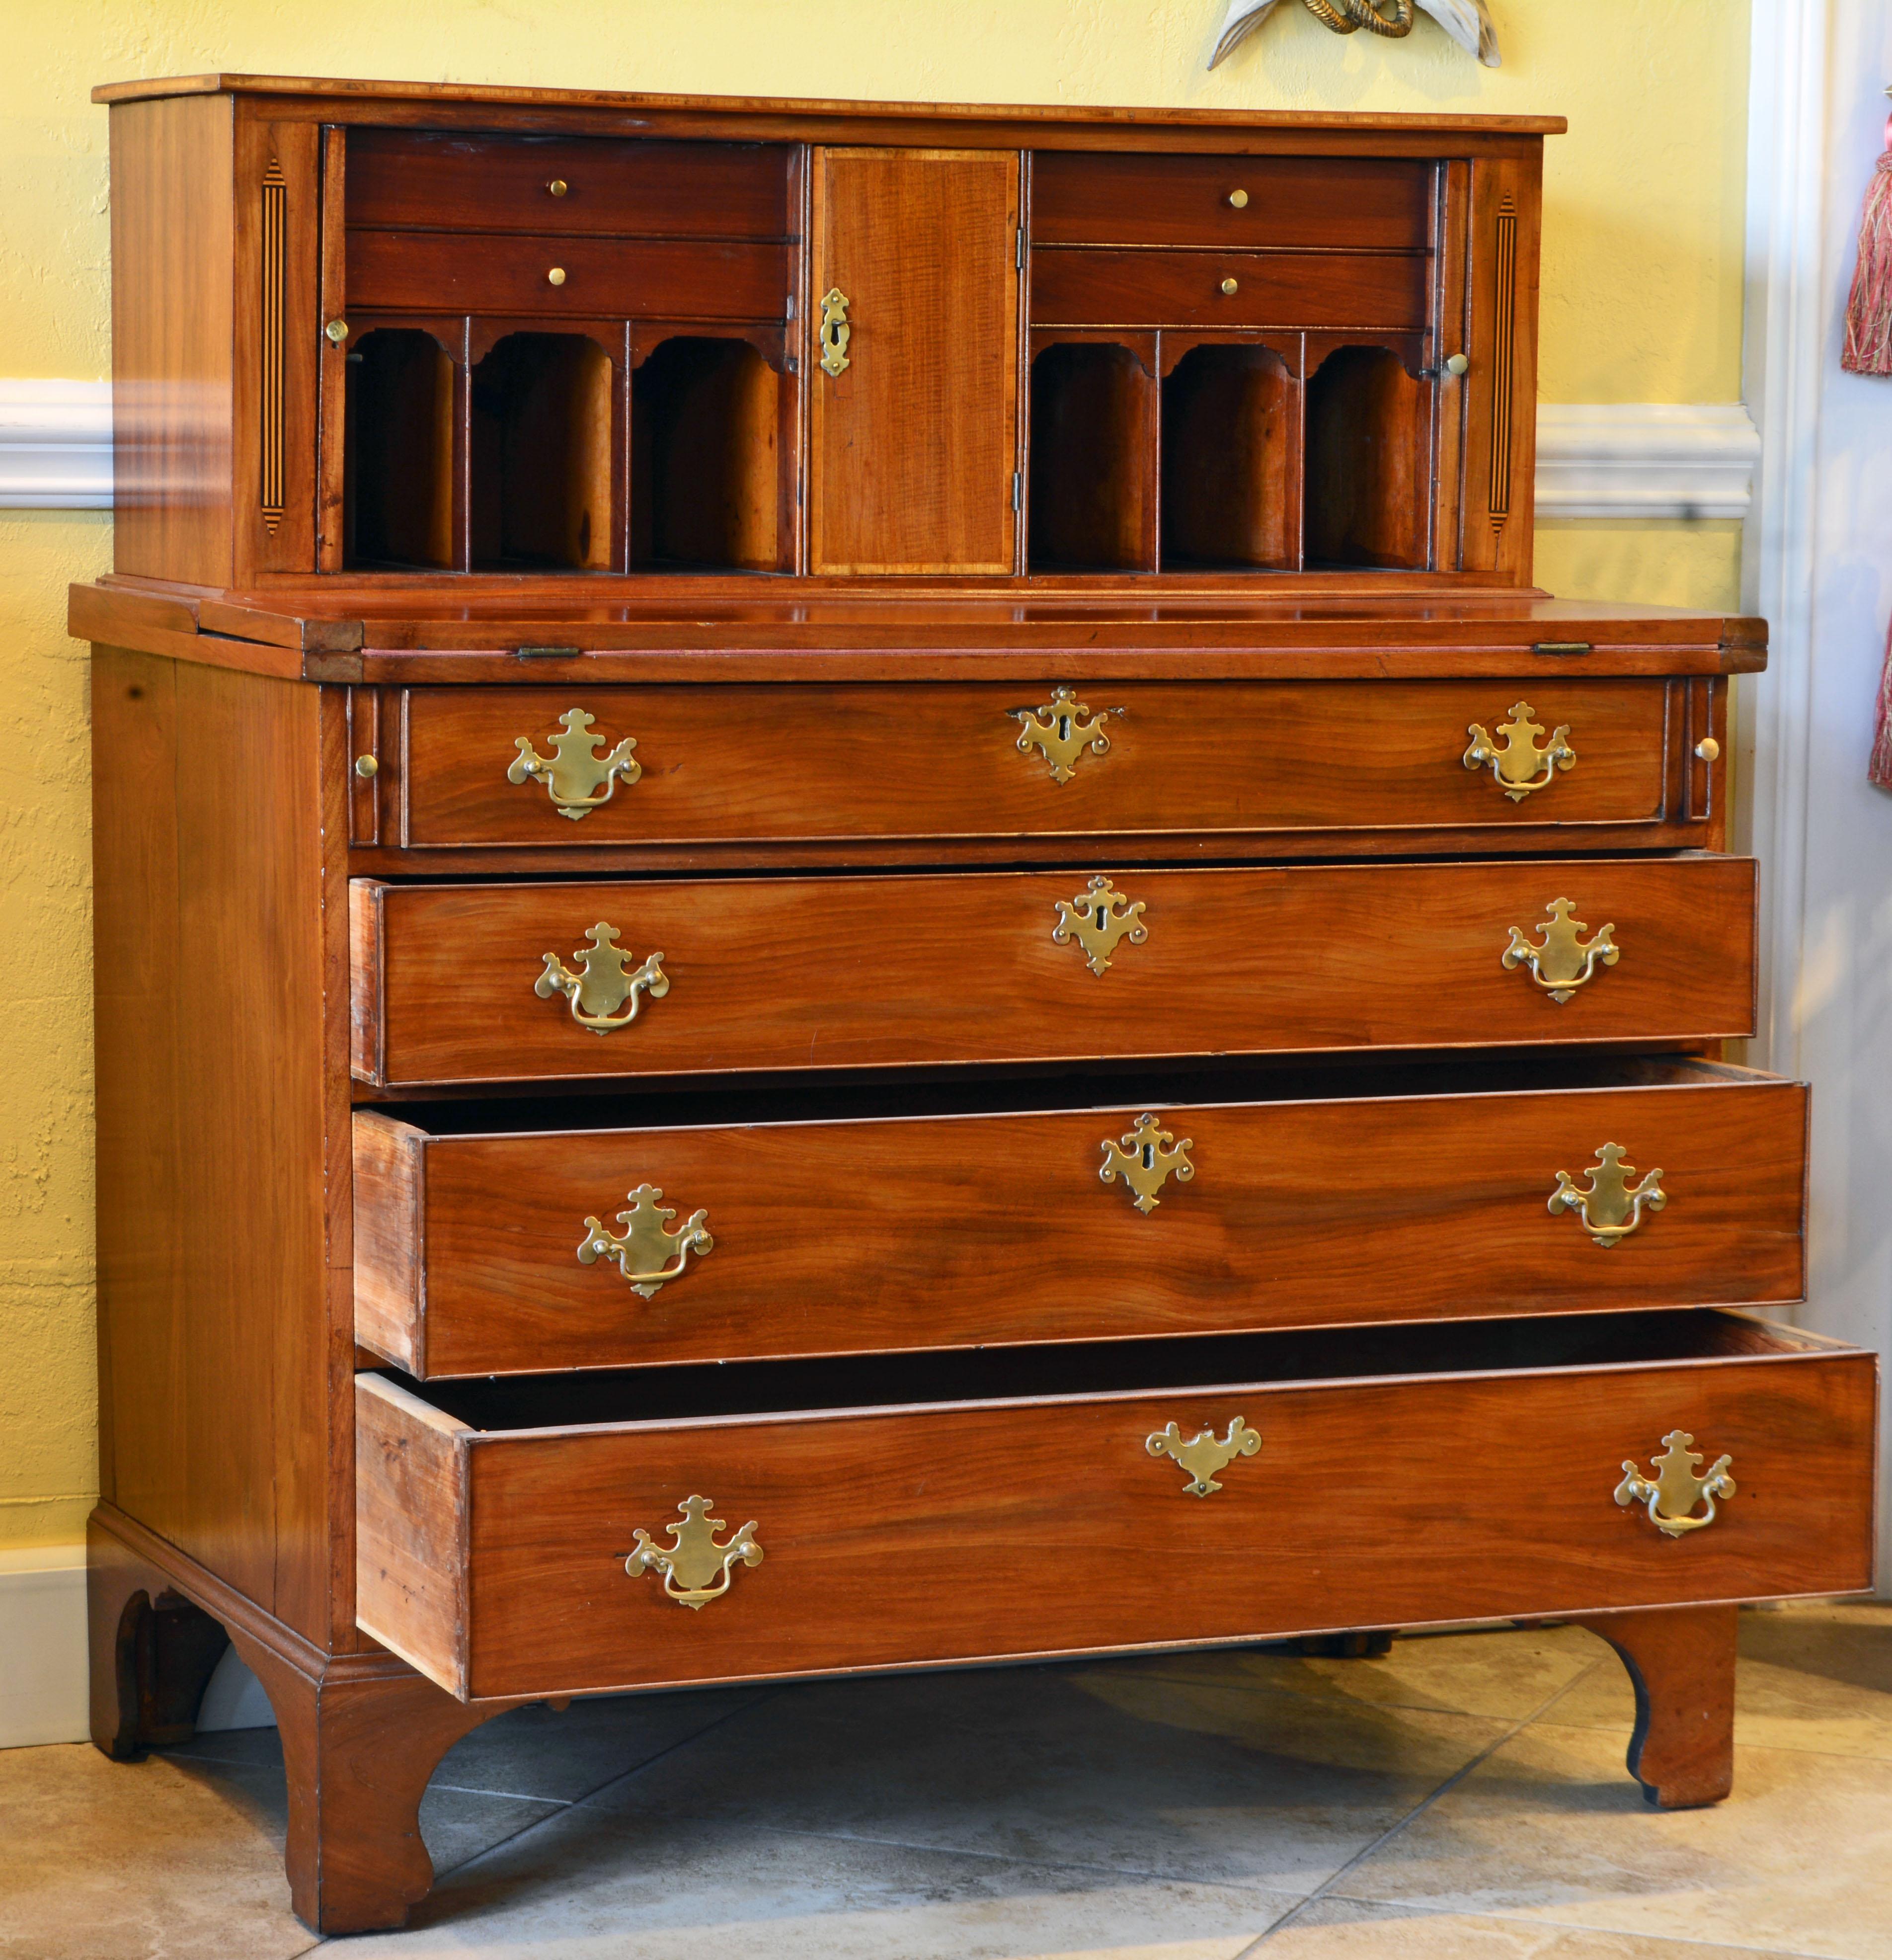 This fine federal mahogany secretary desk features an upper section with tambour doors opening up to interiors fitted with pigeon holes and small drawers centering a banded tiger maple door which opens up to a compartment fitted with pigeon hole and